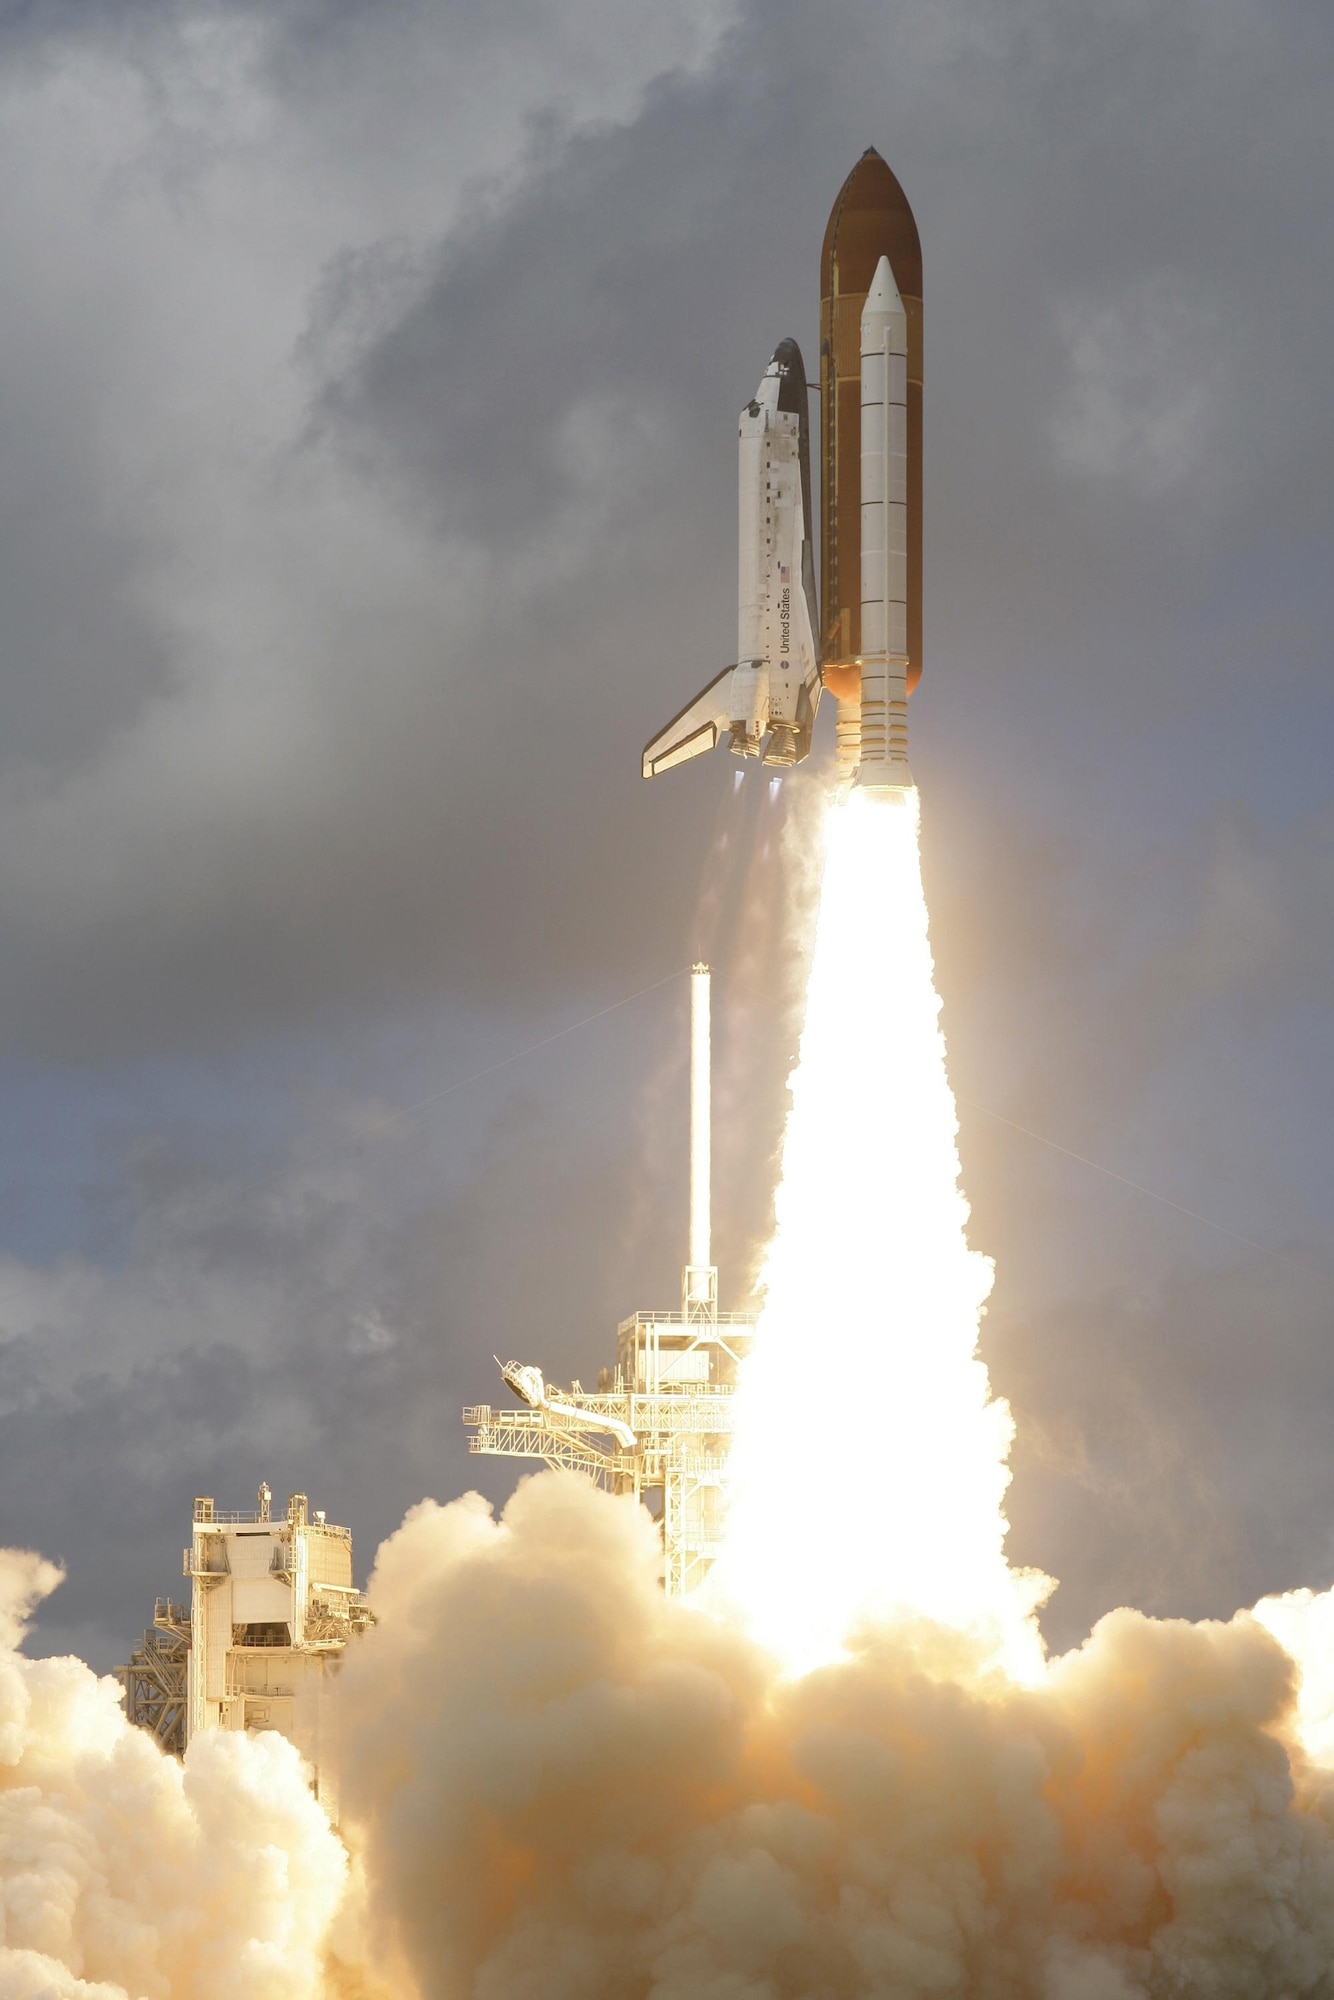 The 45th Space Wing provided flawless support for NASA’s successful launch of Space Shuttle Discovery Oct. 23 at 11:38 a.m. on the 23rd mission to the International Space Station. Discovery will deliver a connecting module that will increase the space station’s interior space